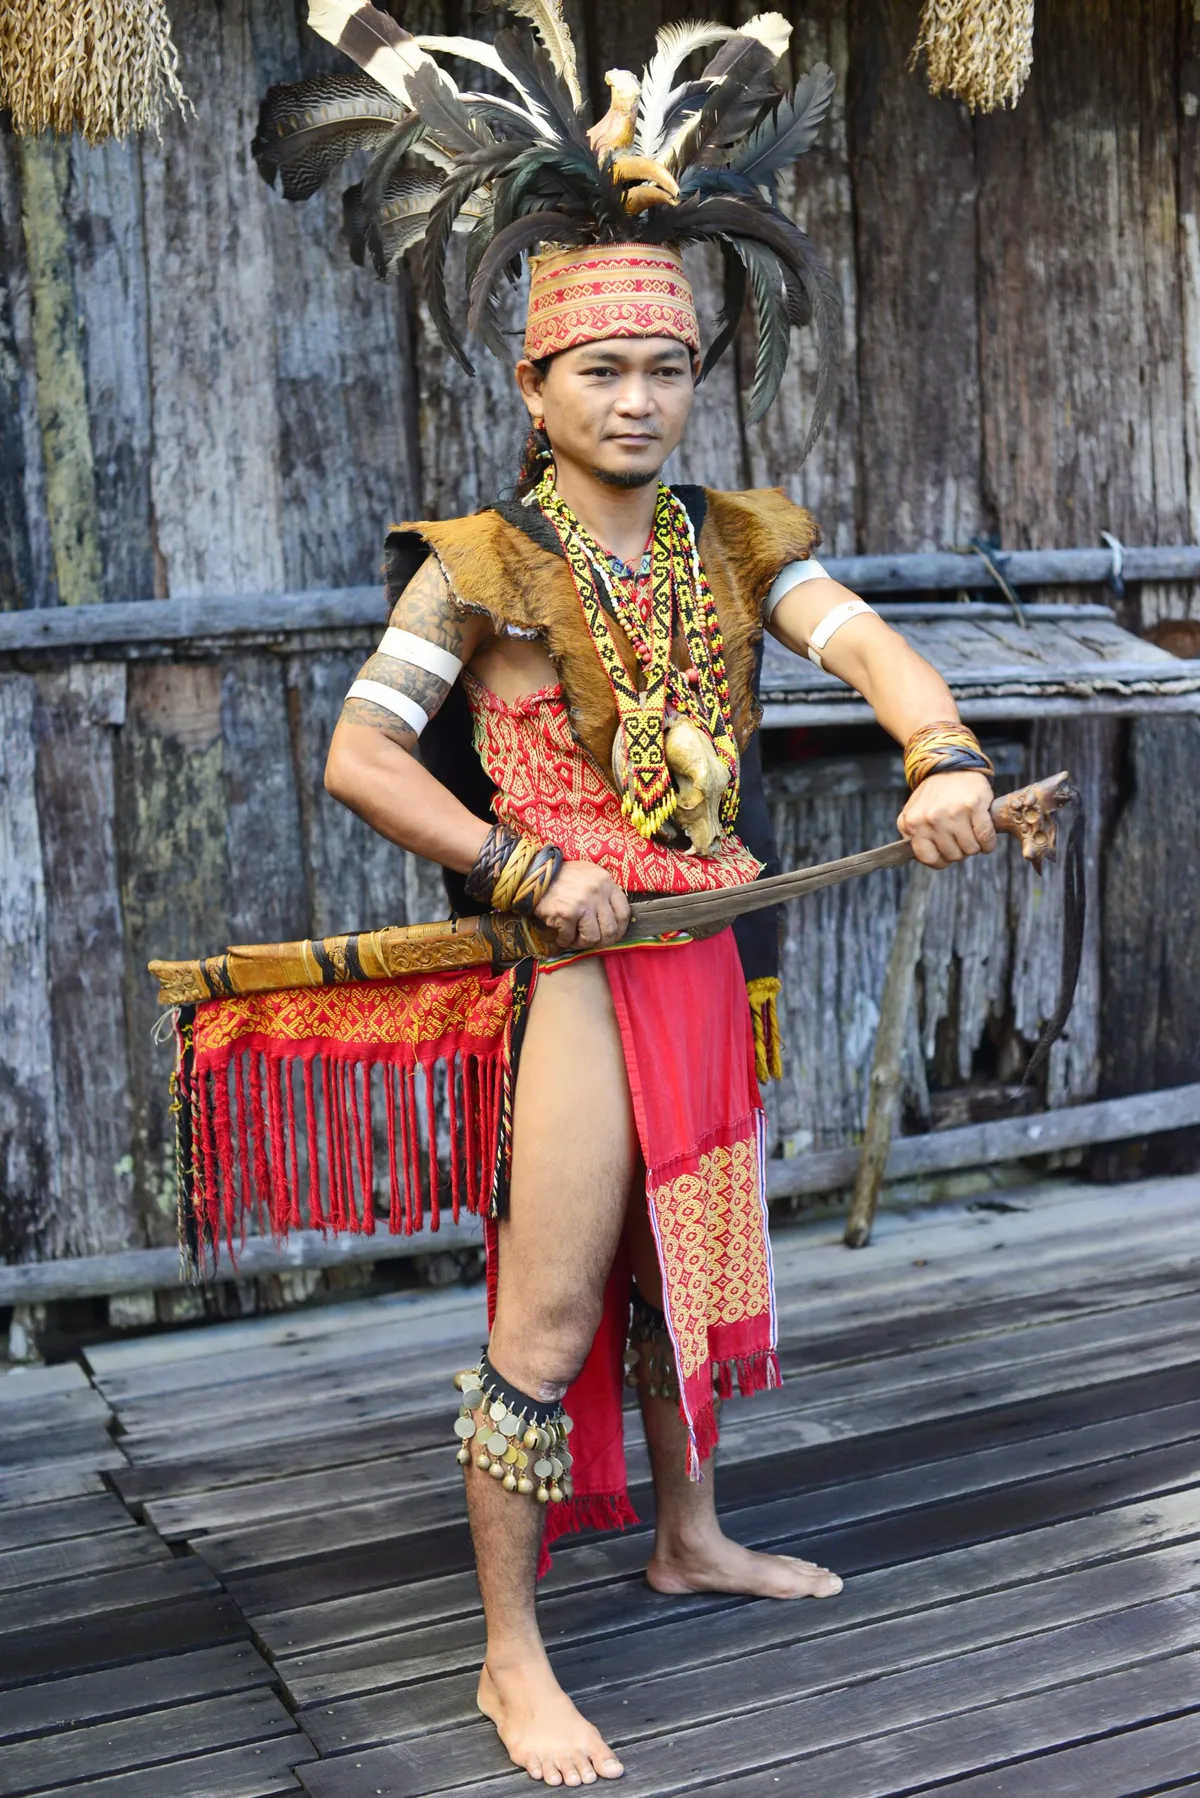 An Iban in traditional warrior costume. The tribe was once much-feared as headhunters. © Mark Eveleigh